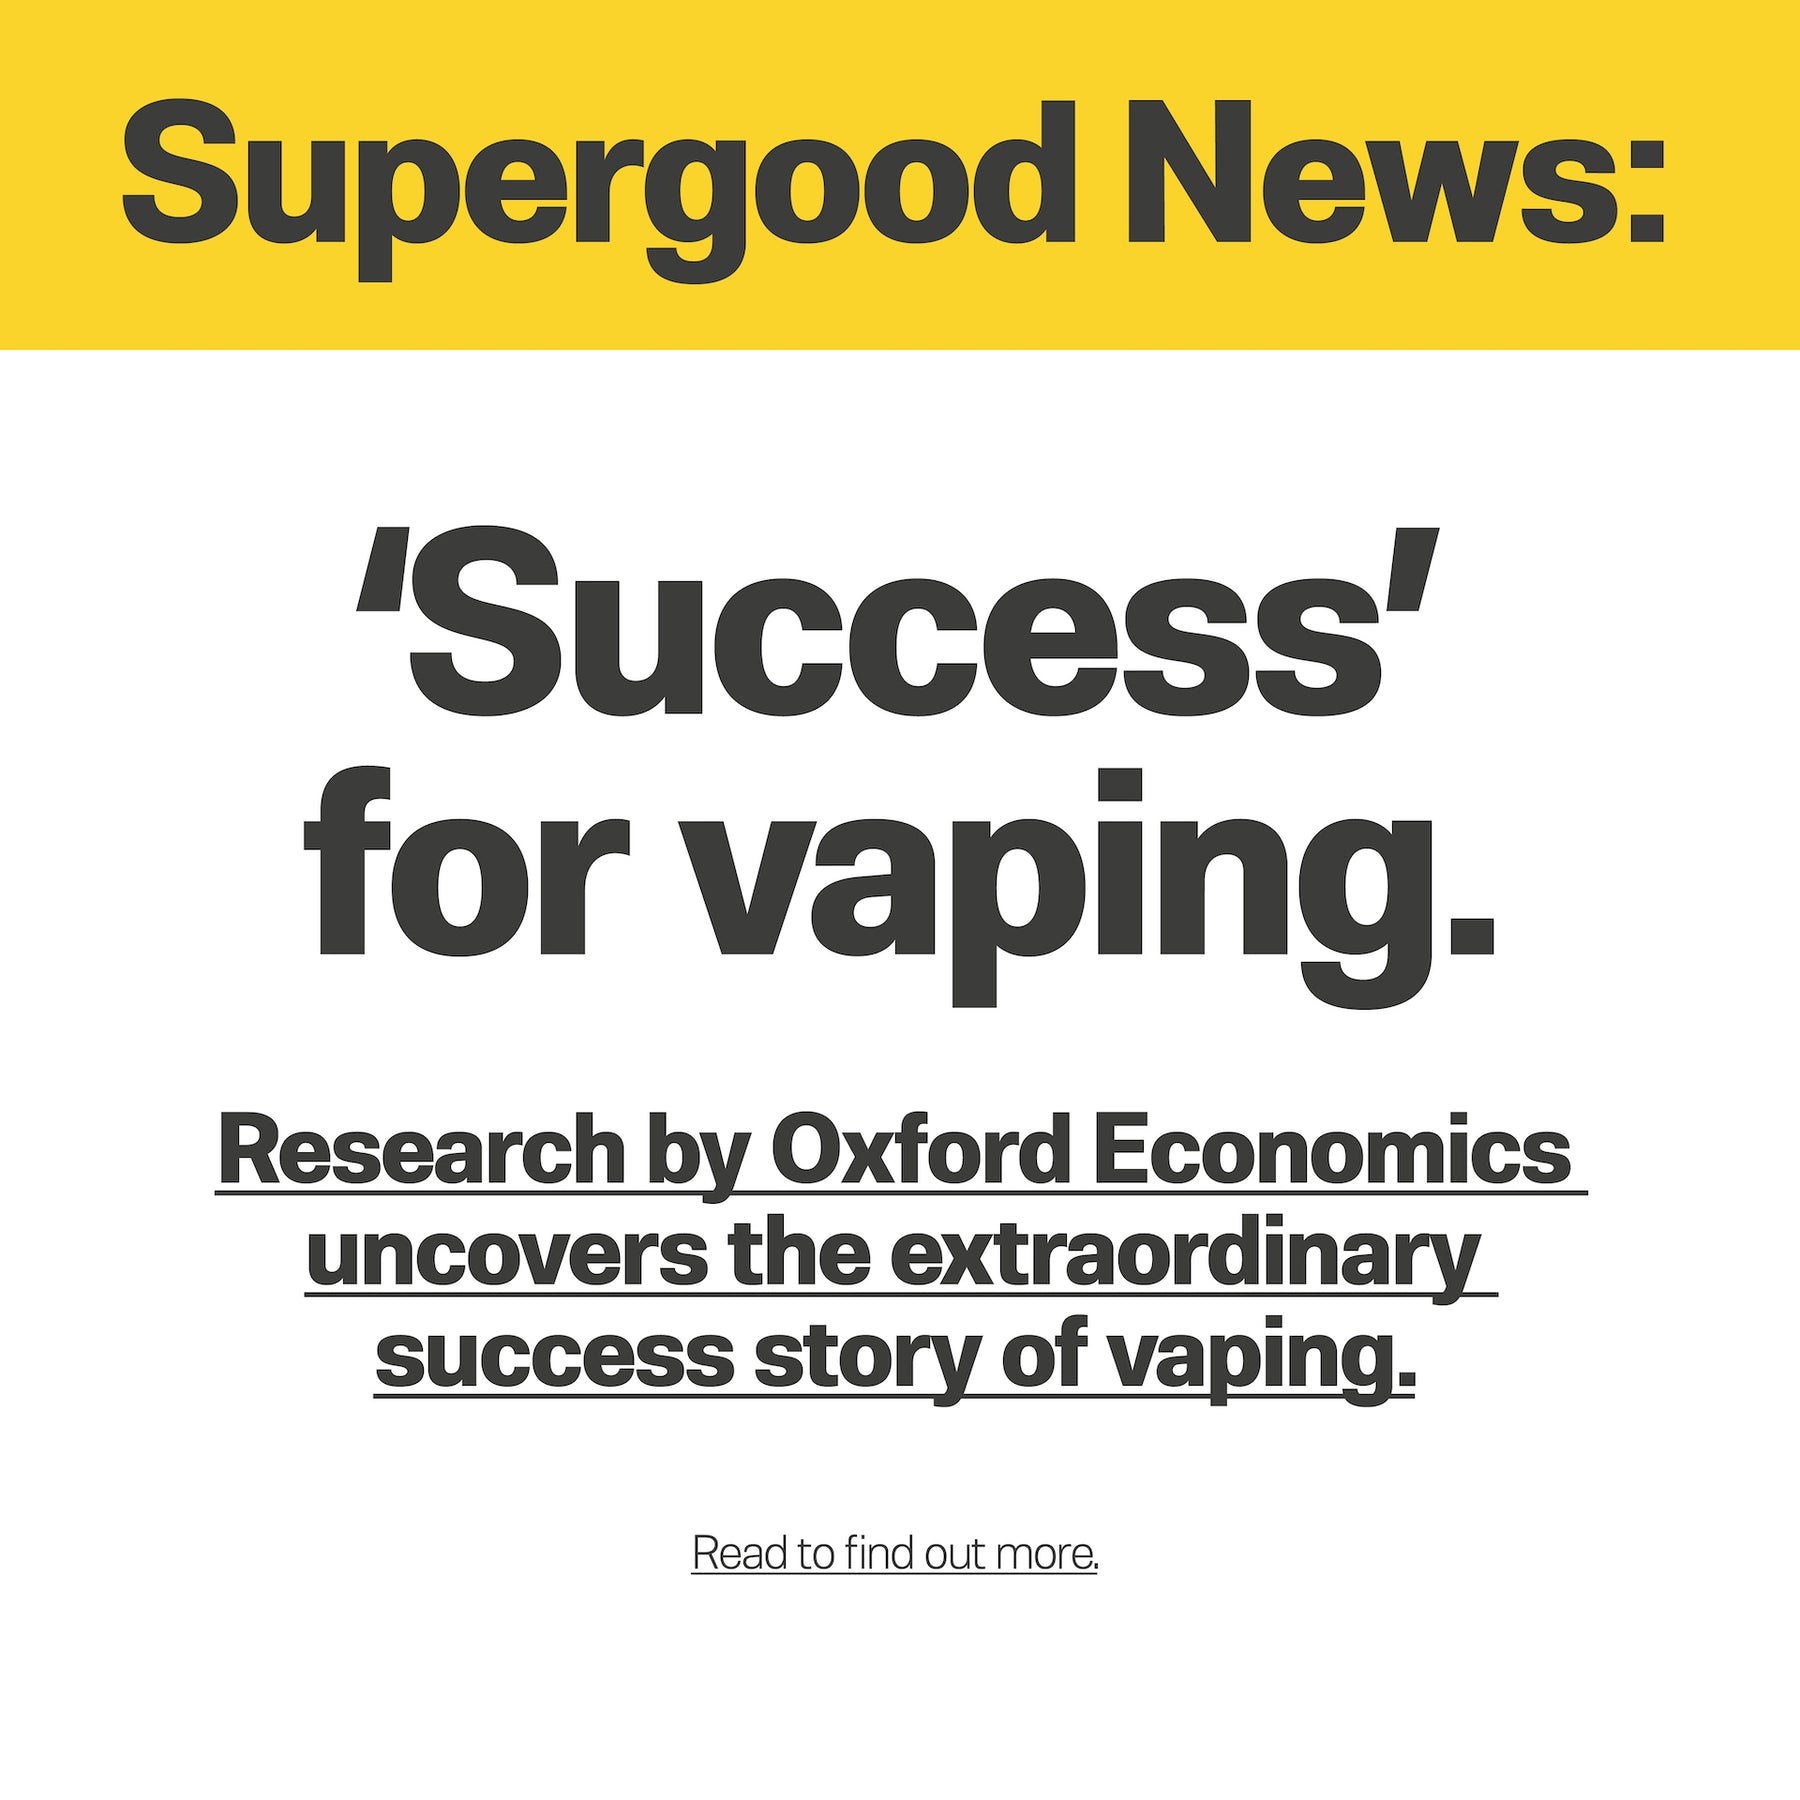 ‘Success’ for vaping.